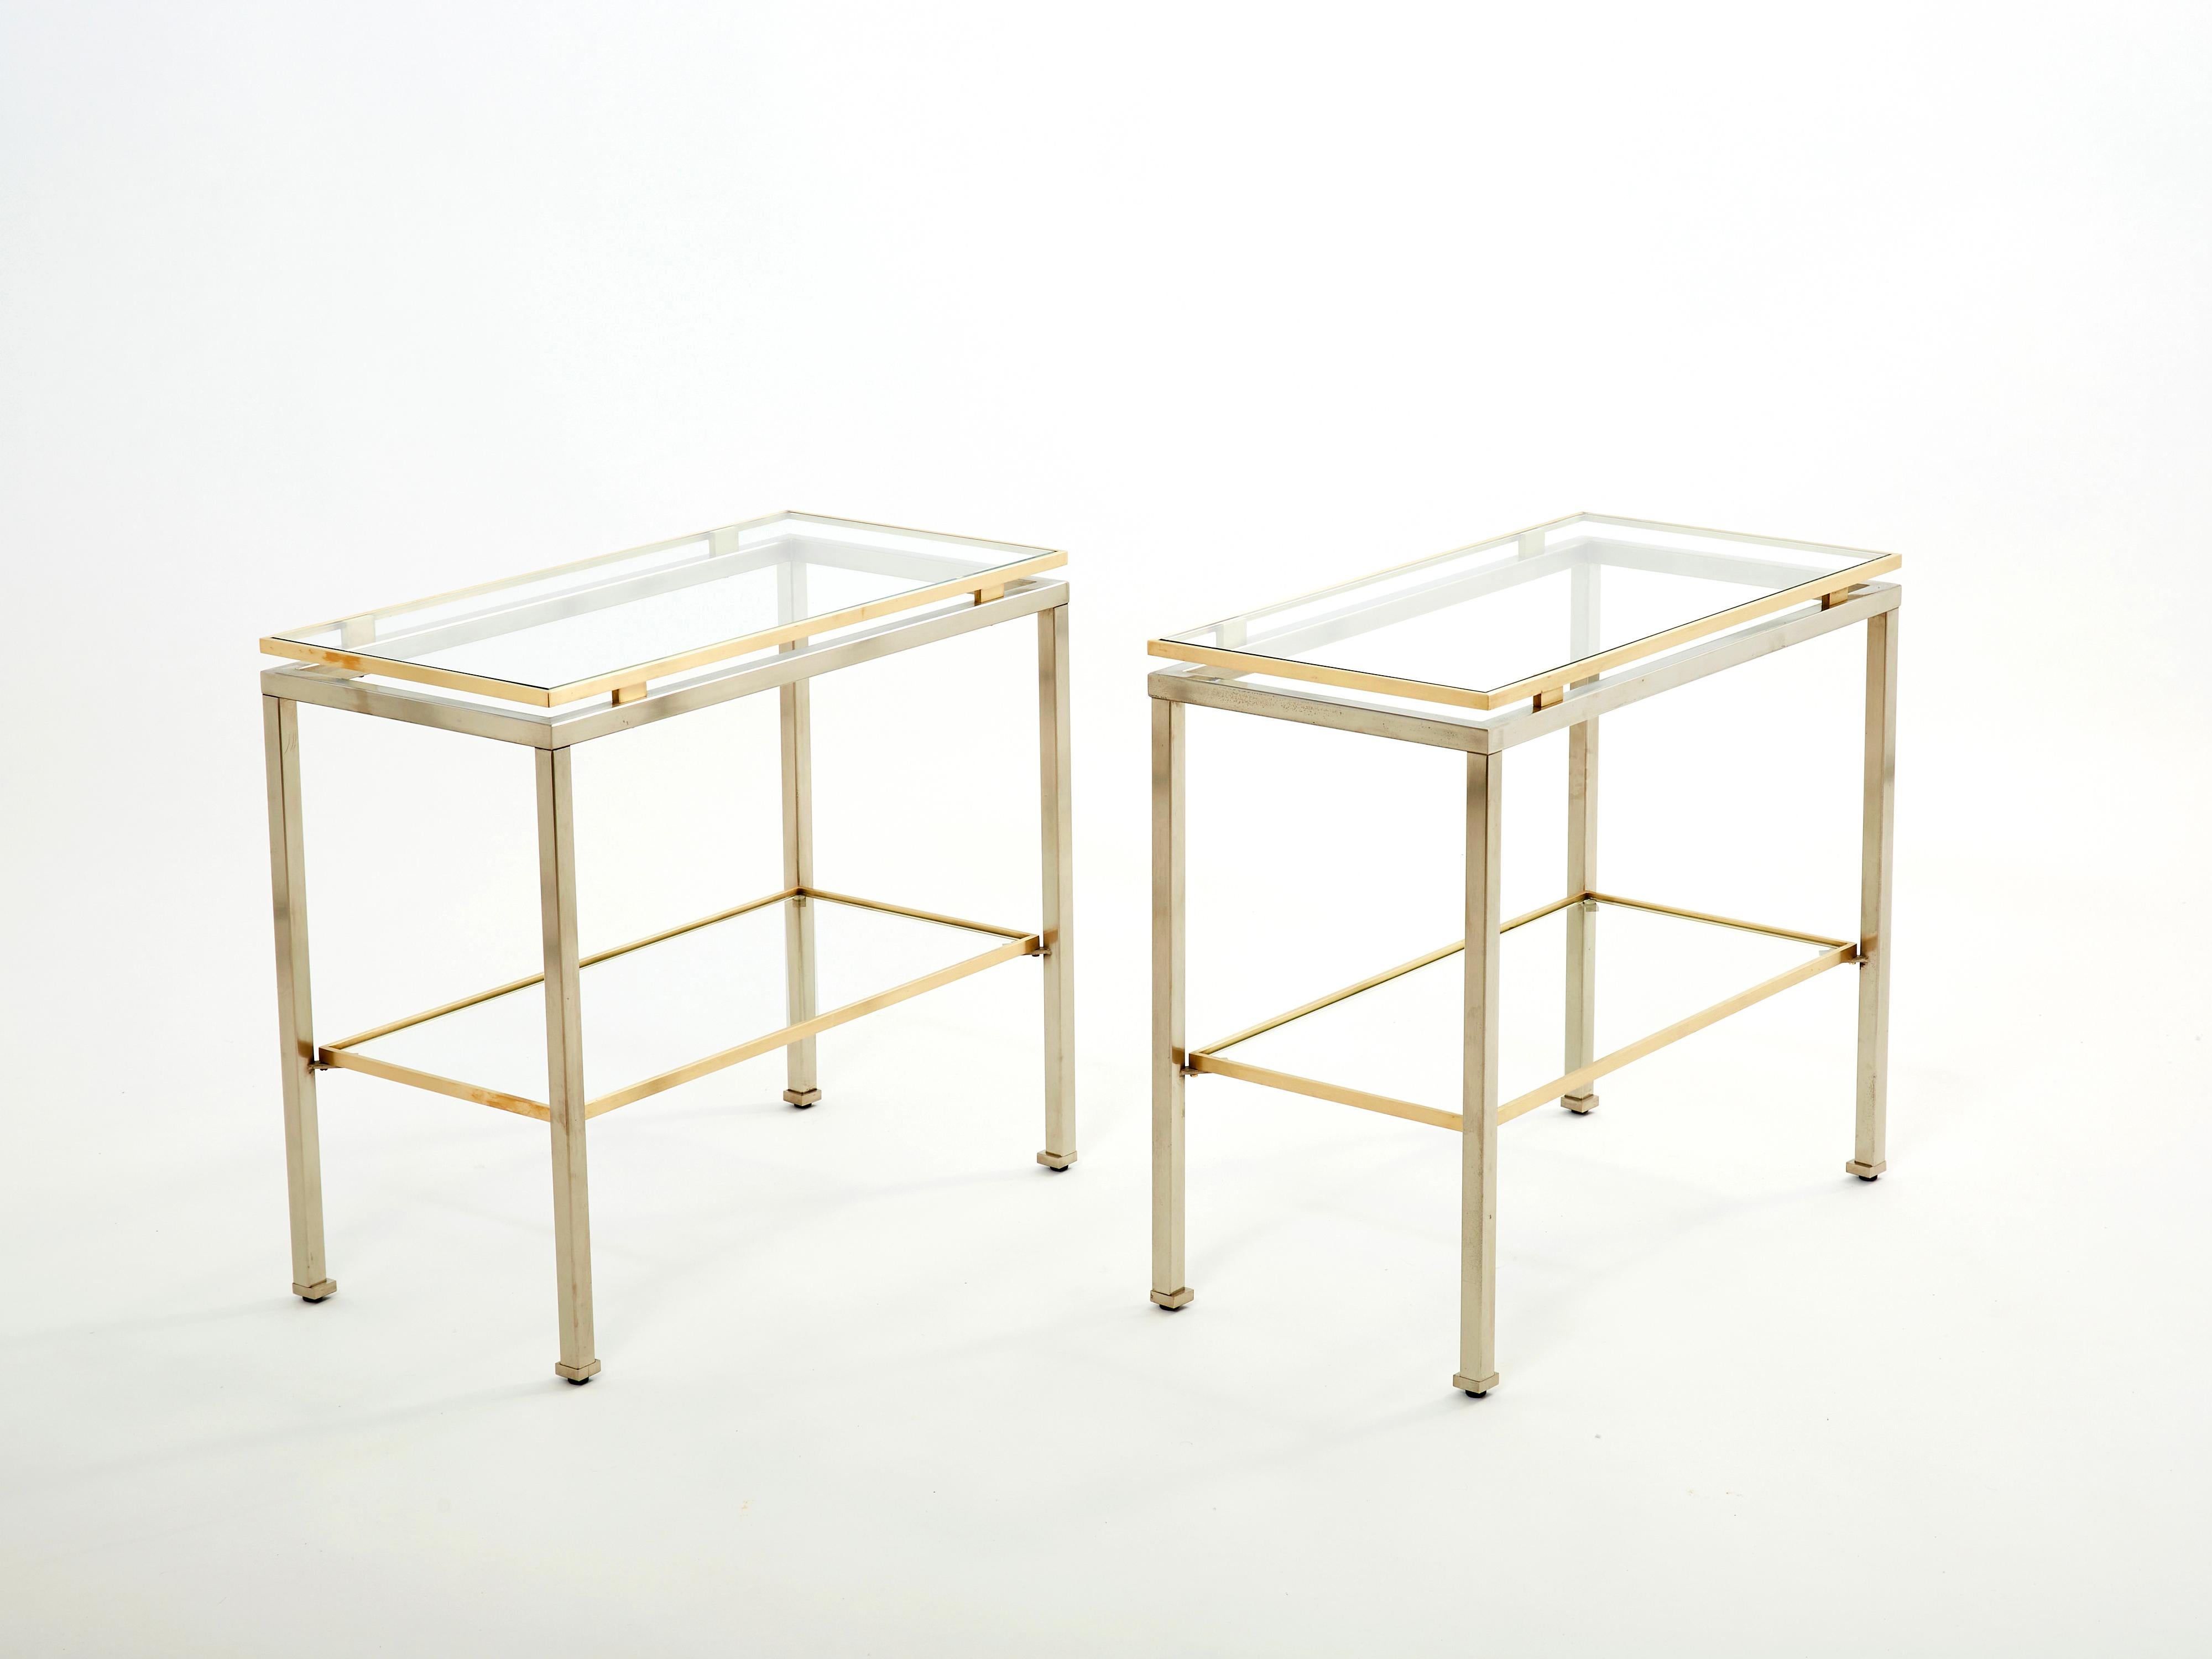 Simple lines point to these two-tier end tables with French midcentury roots. Designed by Guy Lefevre for Maison Jansen, it features smooth steel legs with brass top and accents, and transparent glass tops. Its symmetry, elevated glass, and strong